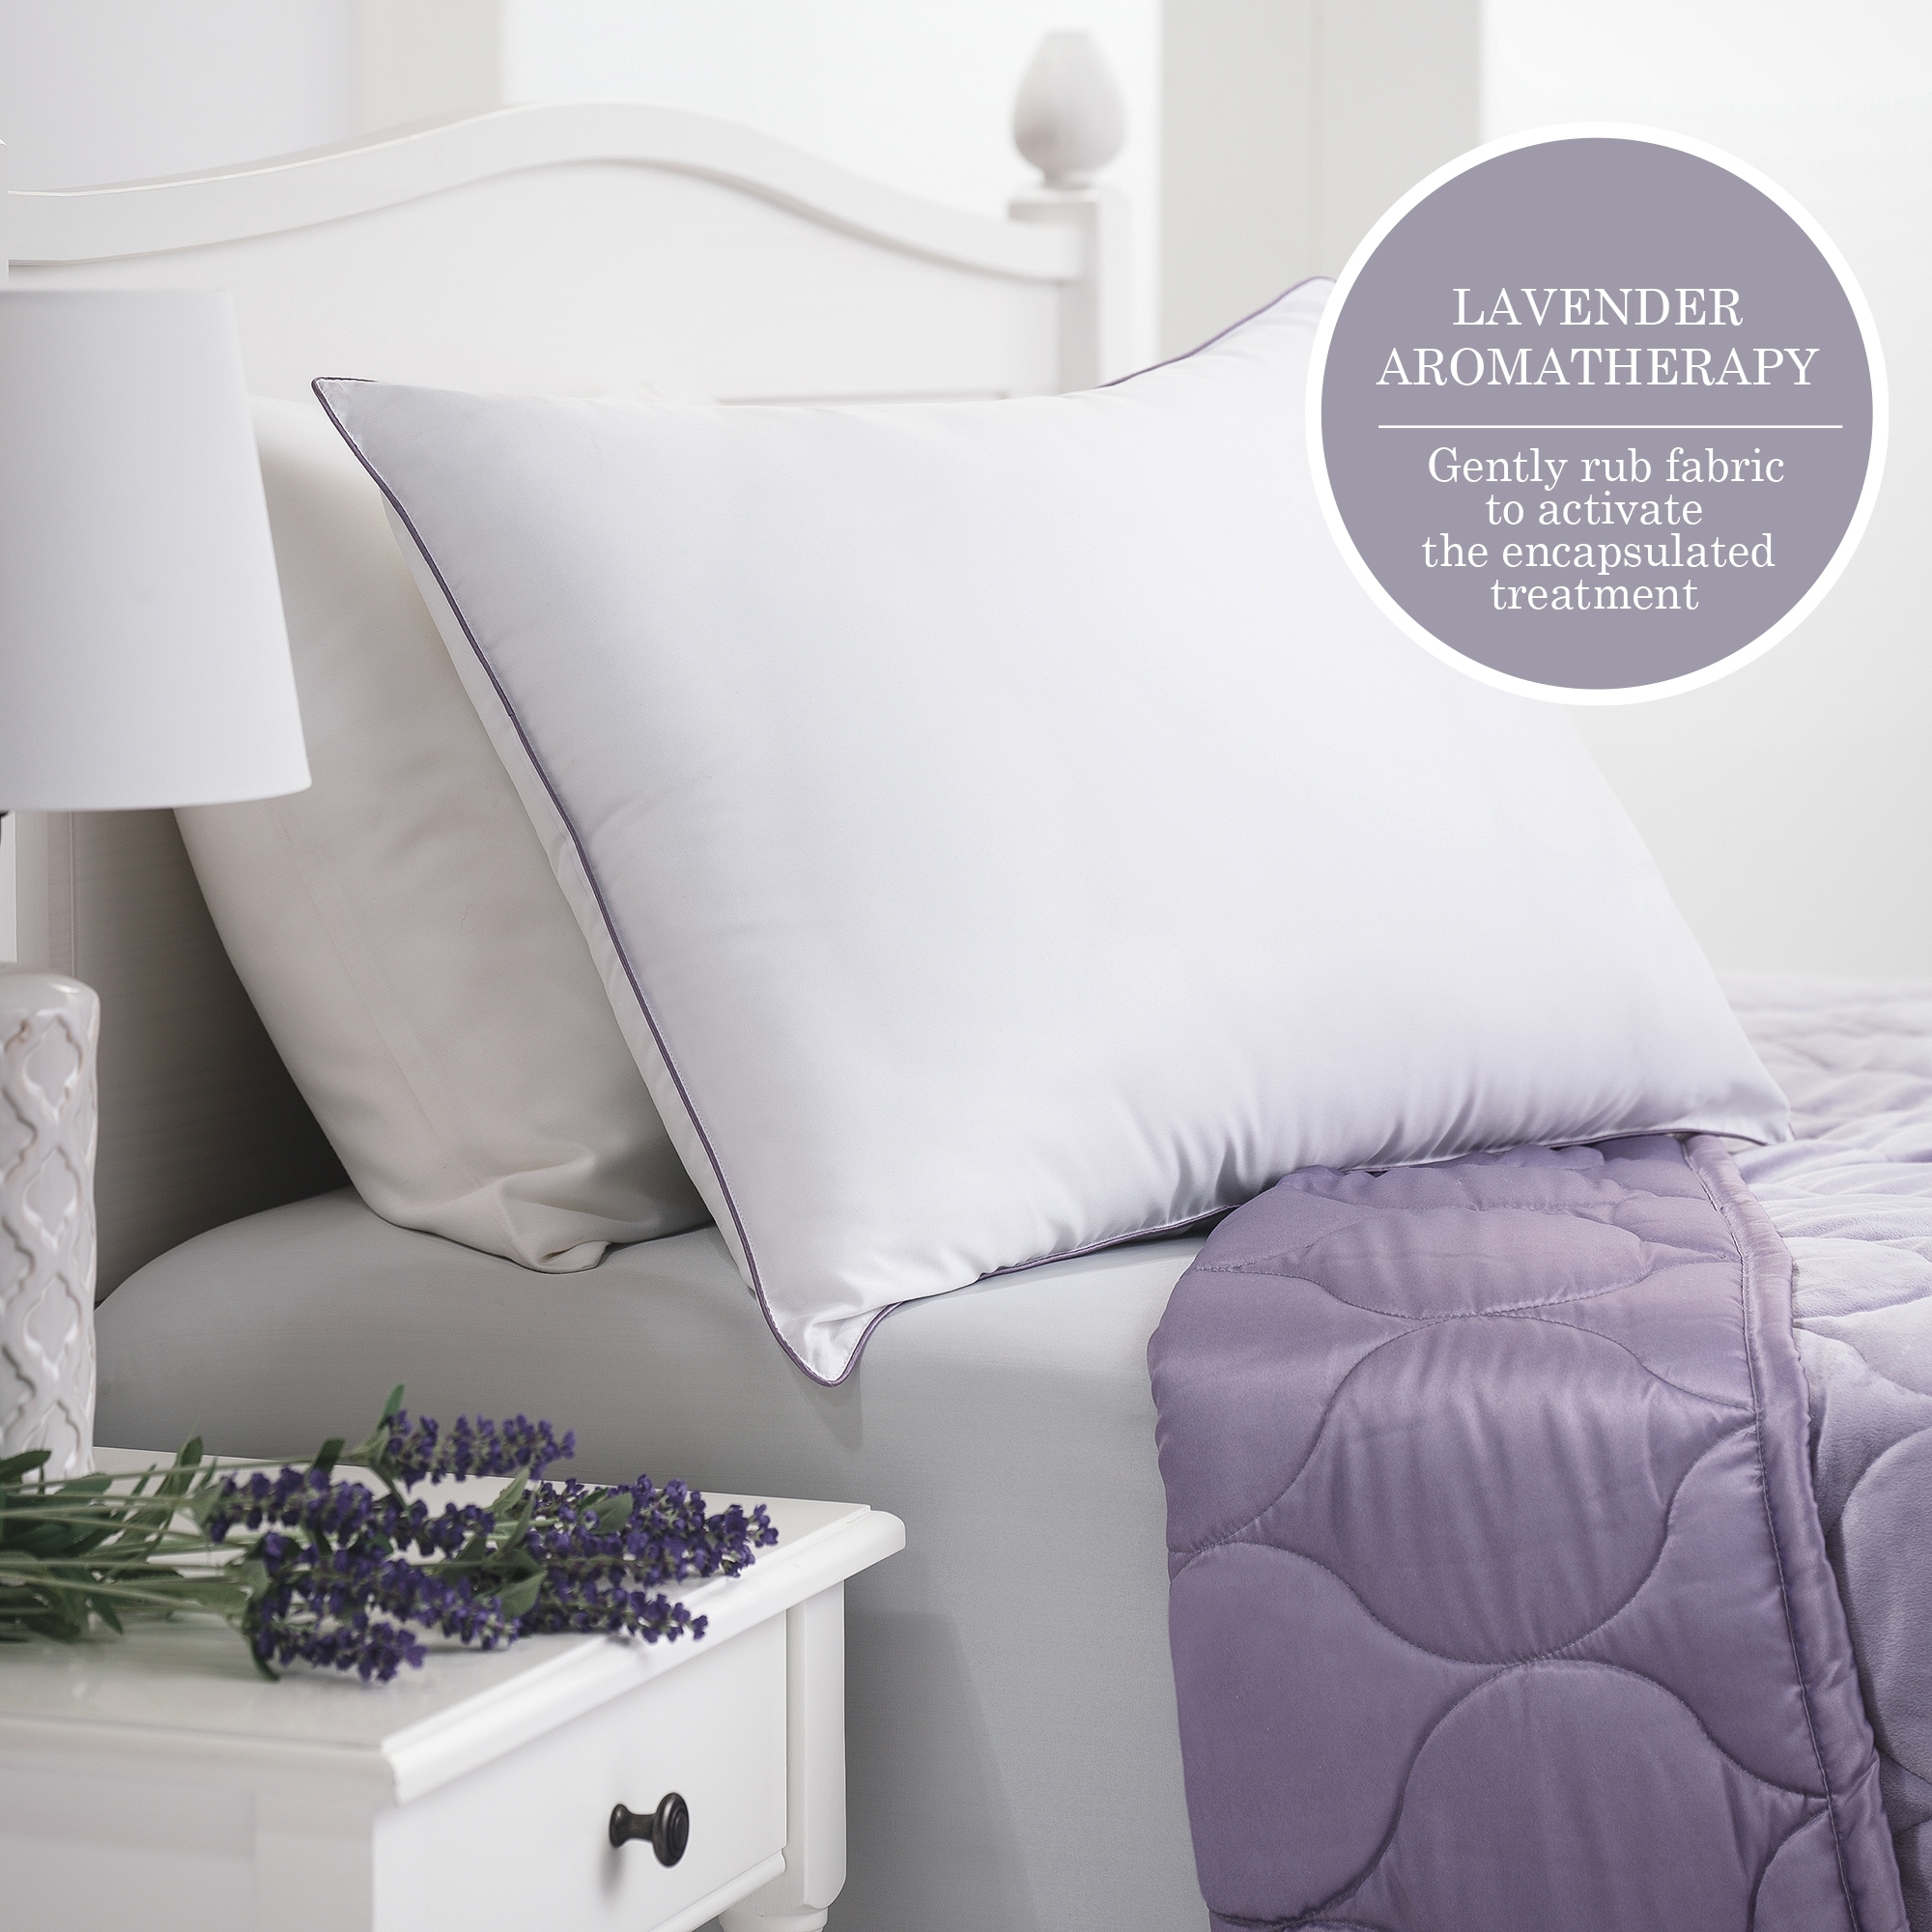 https://ak1.ostkcdn.com/images/products/is/images/direct/37ba3fd65fb38c7fd13c576c273704d7e5bfd52d/Aromatherapy-Lavender-Scented-Down-Alternative-Pillow.jpg